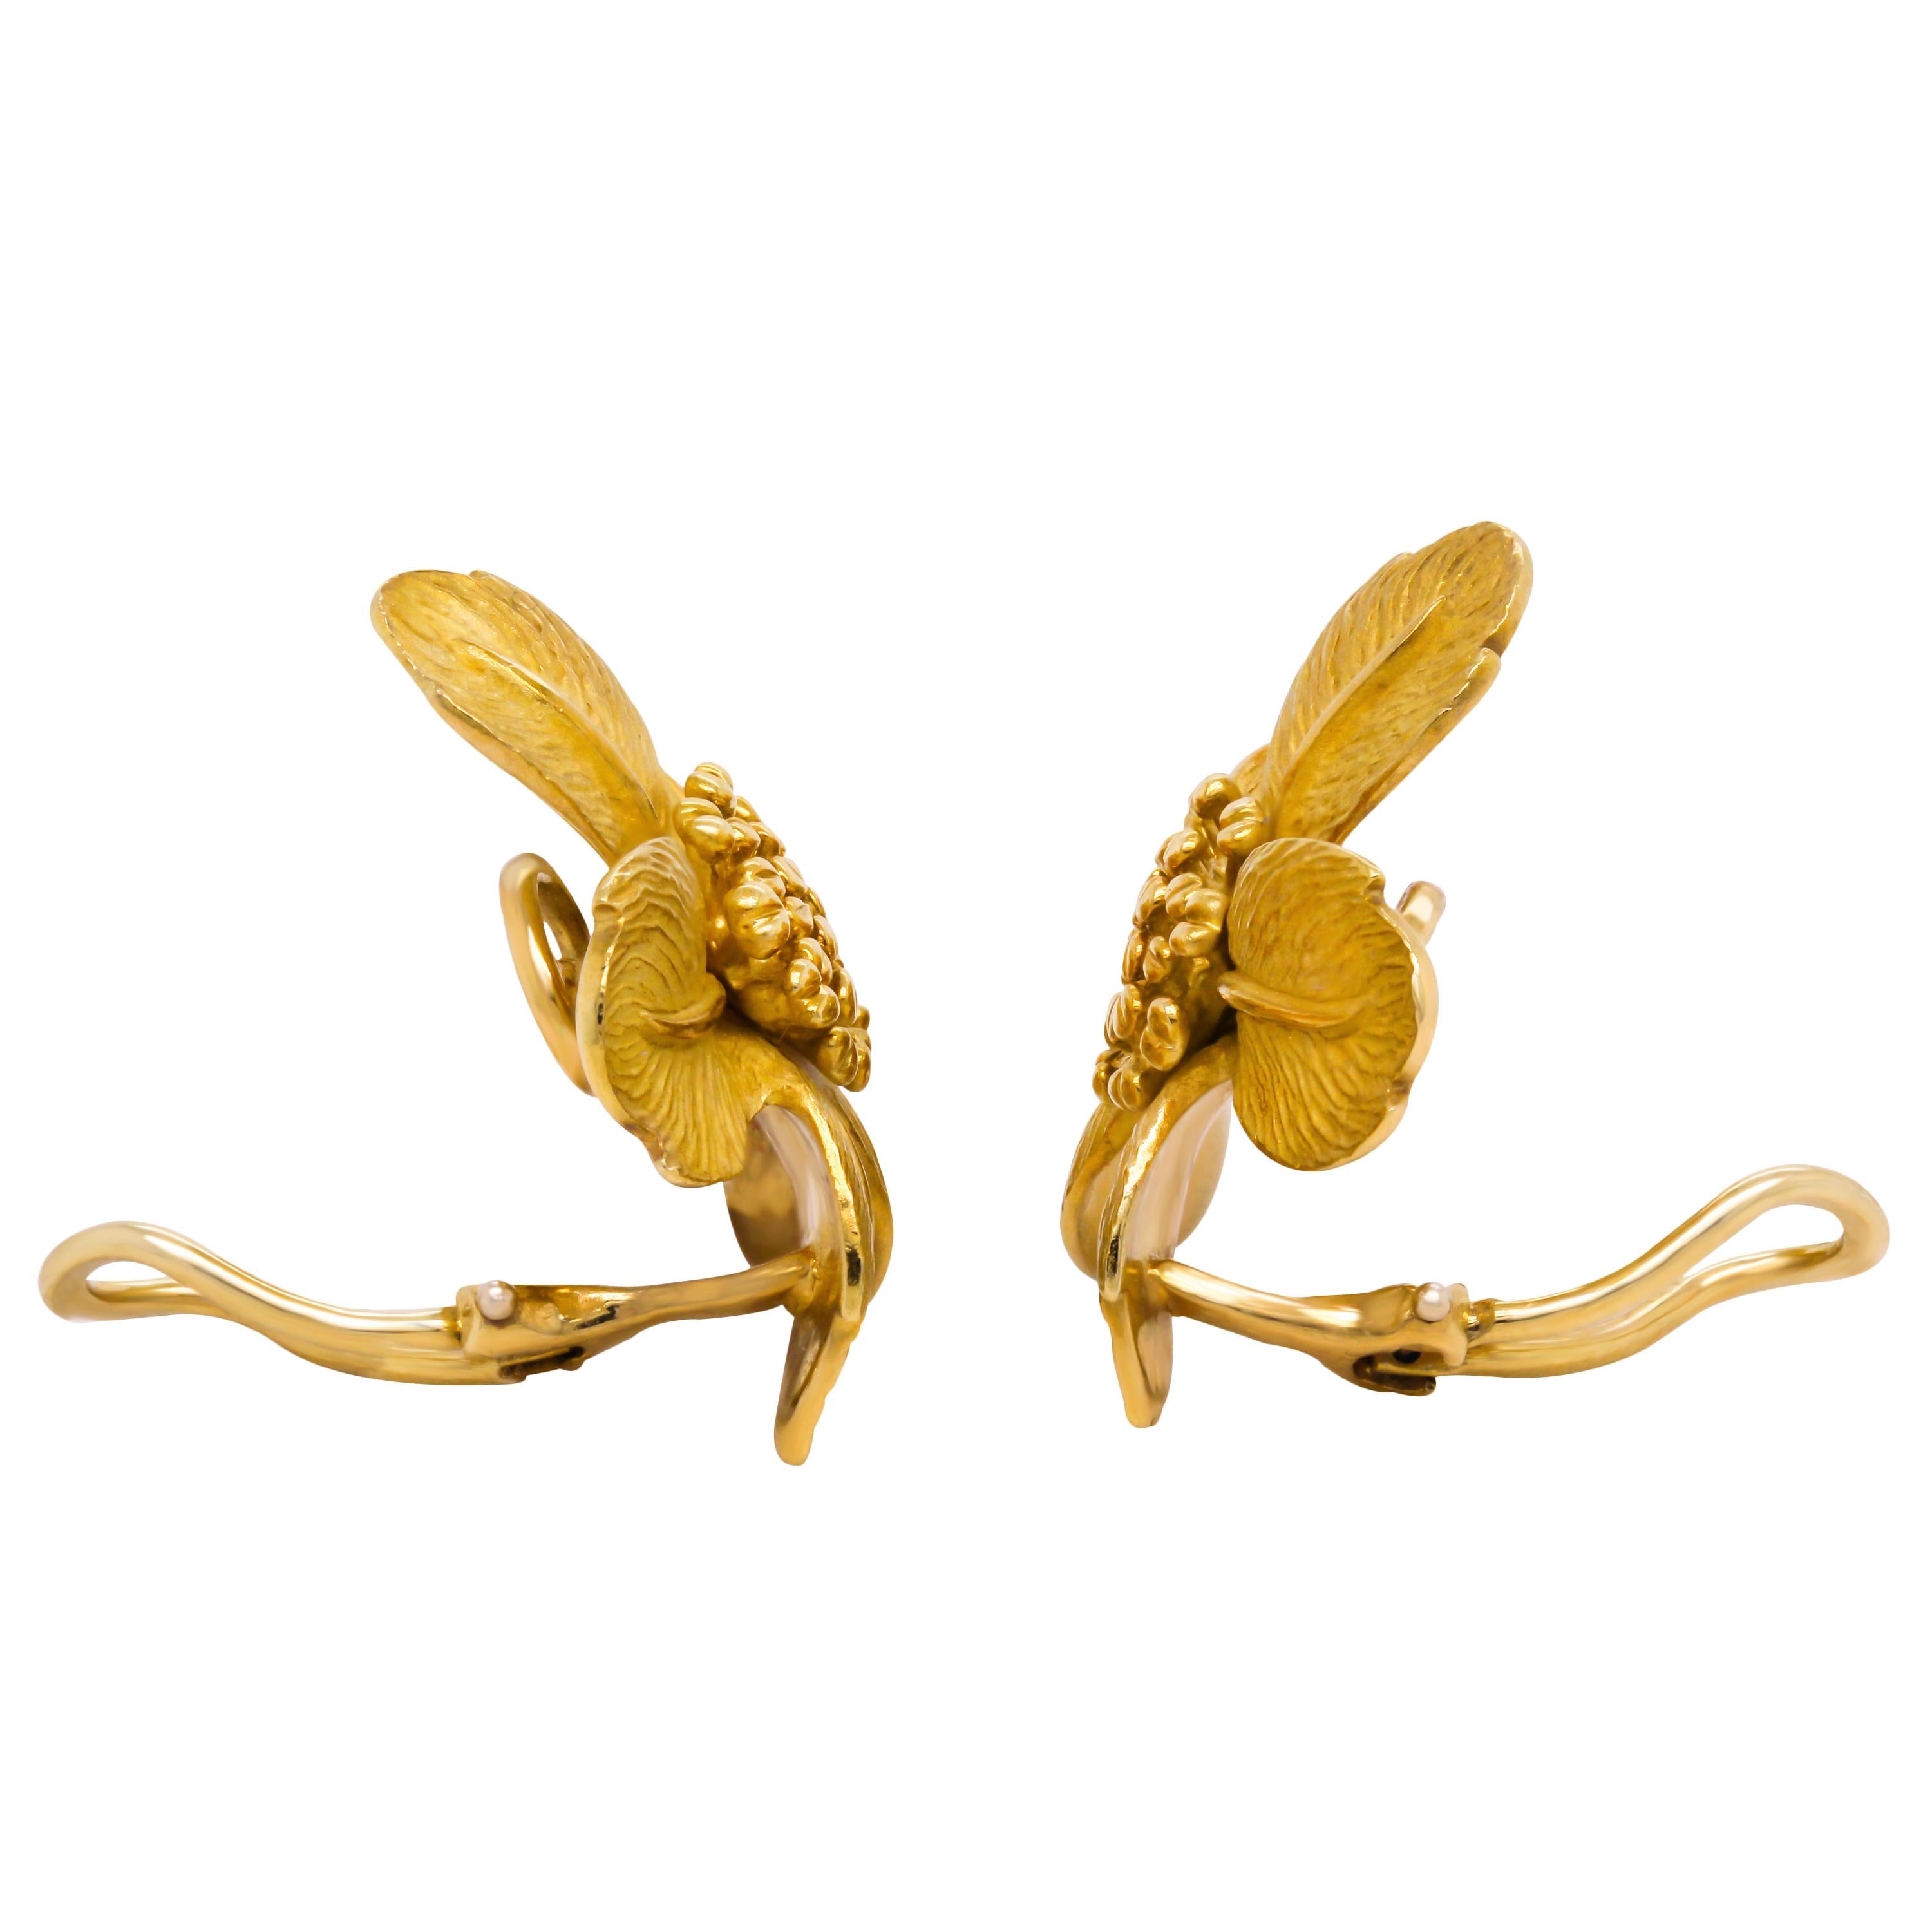 Tiffany & Co. Dogwood Collection 18K Yellow Gold Large Rose Flower Earrings

The rare and original, Dogwood earrings crafted in solid 18k yellow gold with a shiny, high-polish and matte finish. This collection was made in the UK around the 1980s.